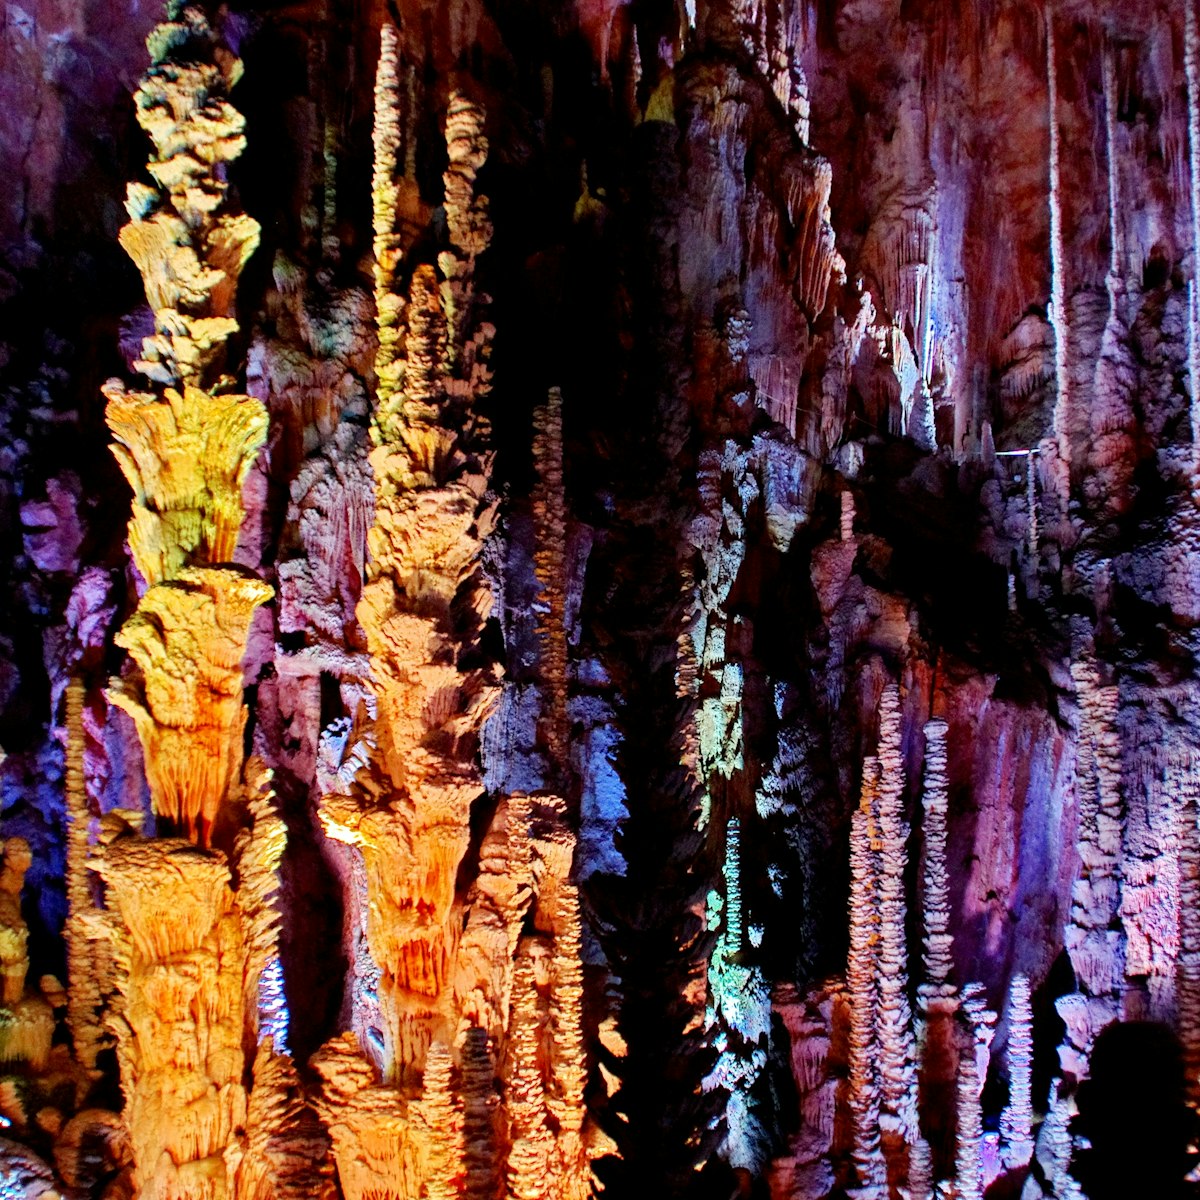 Stalactites and stalagmites lit with multicolored lights in the Aven Armand cave.